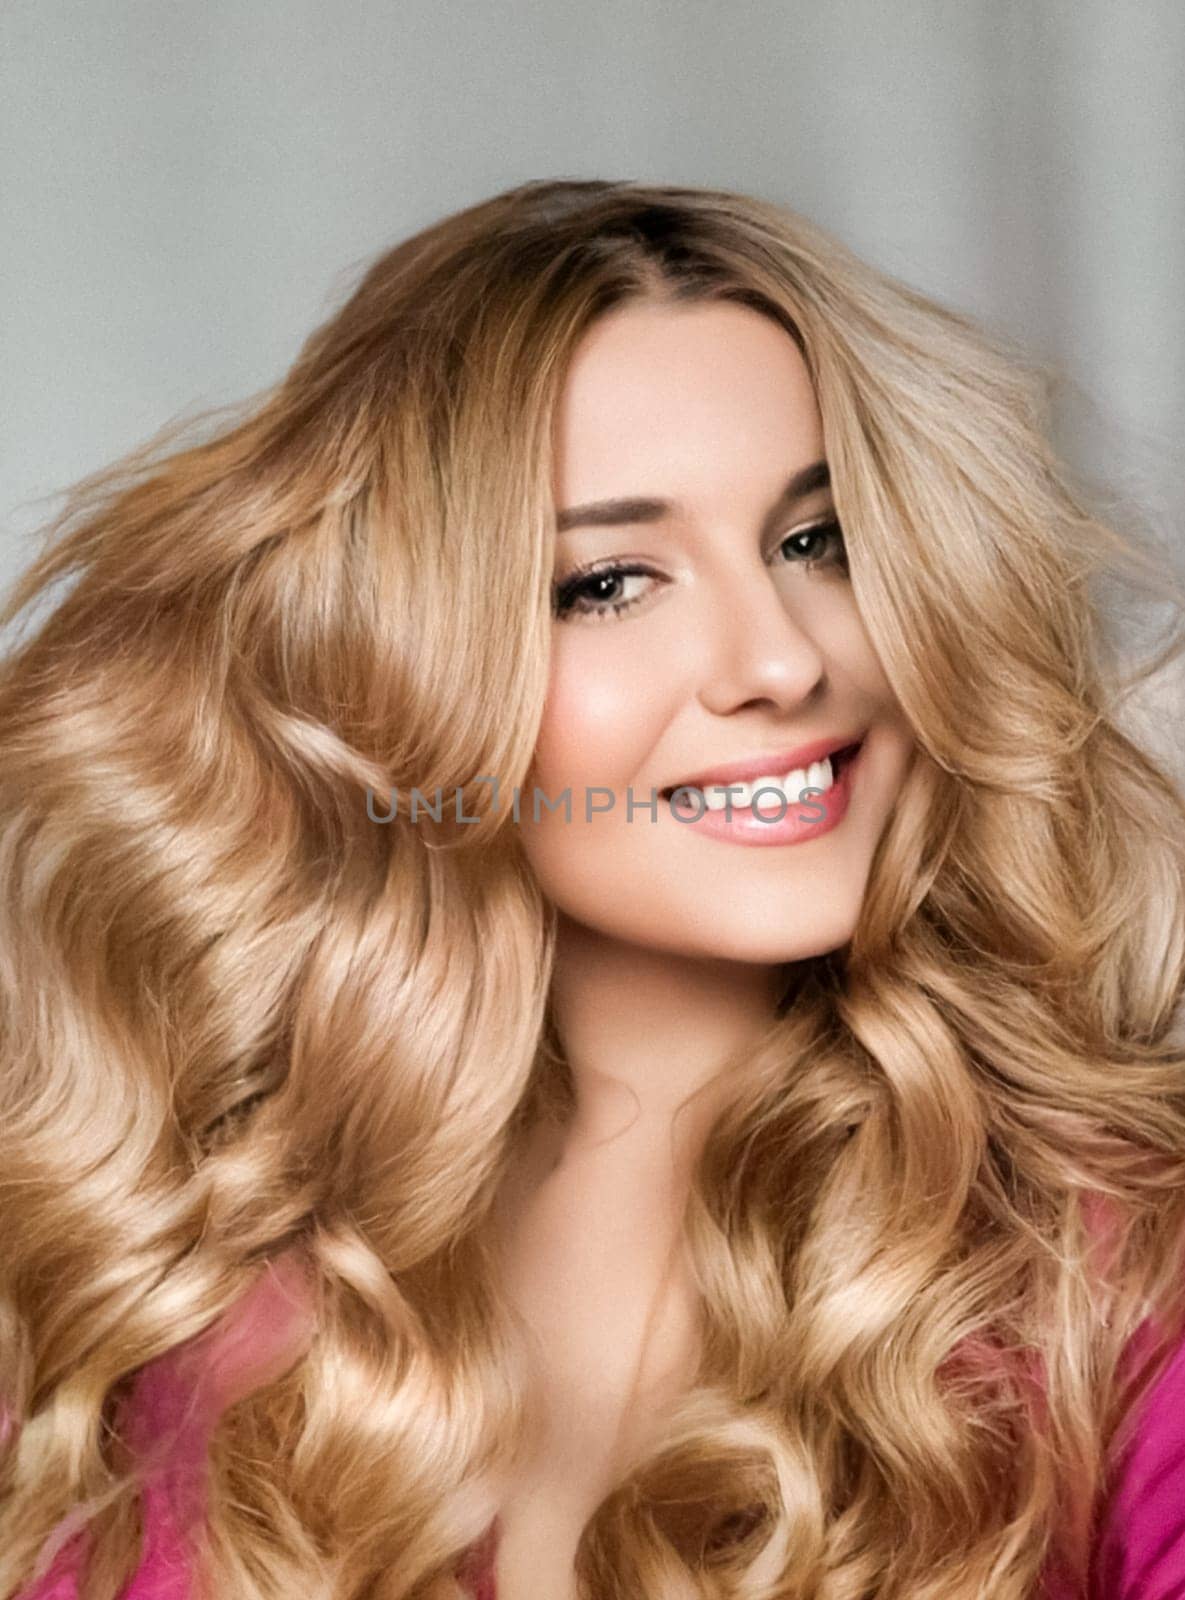 Beautiful blonde woman with curly volume hairstyle, long luxurious hair and beauty makeup, glamorous look face portrait for luxury fashion and natural cosmetics by Anneleven